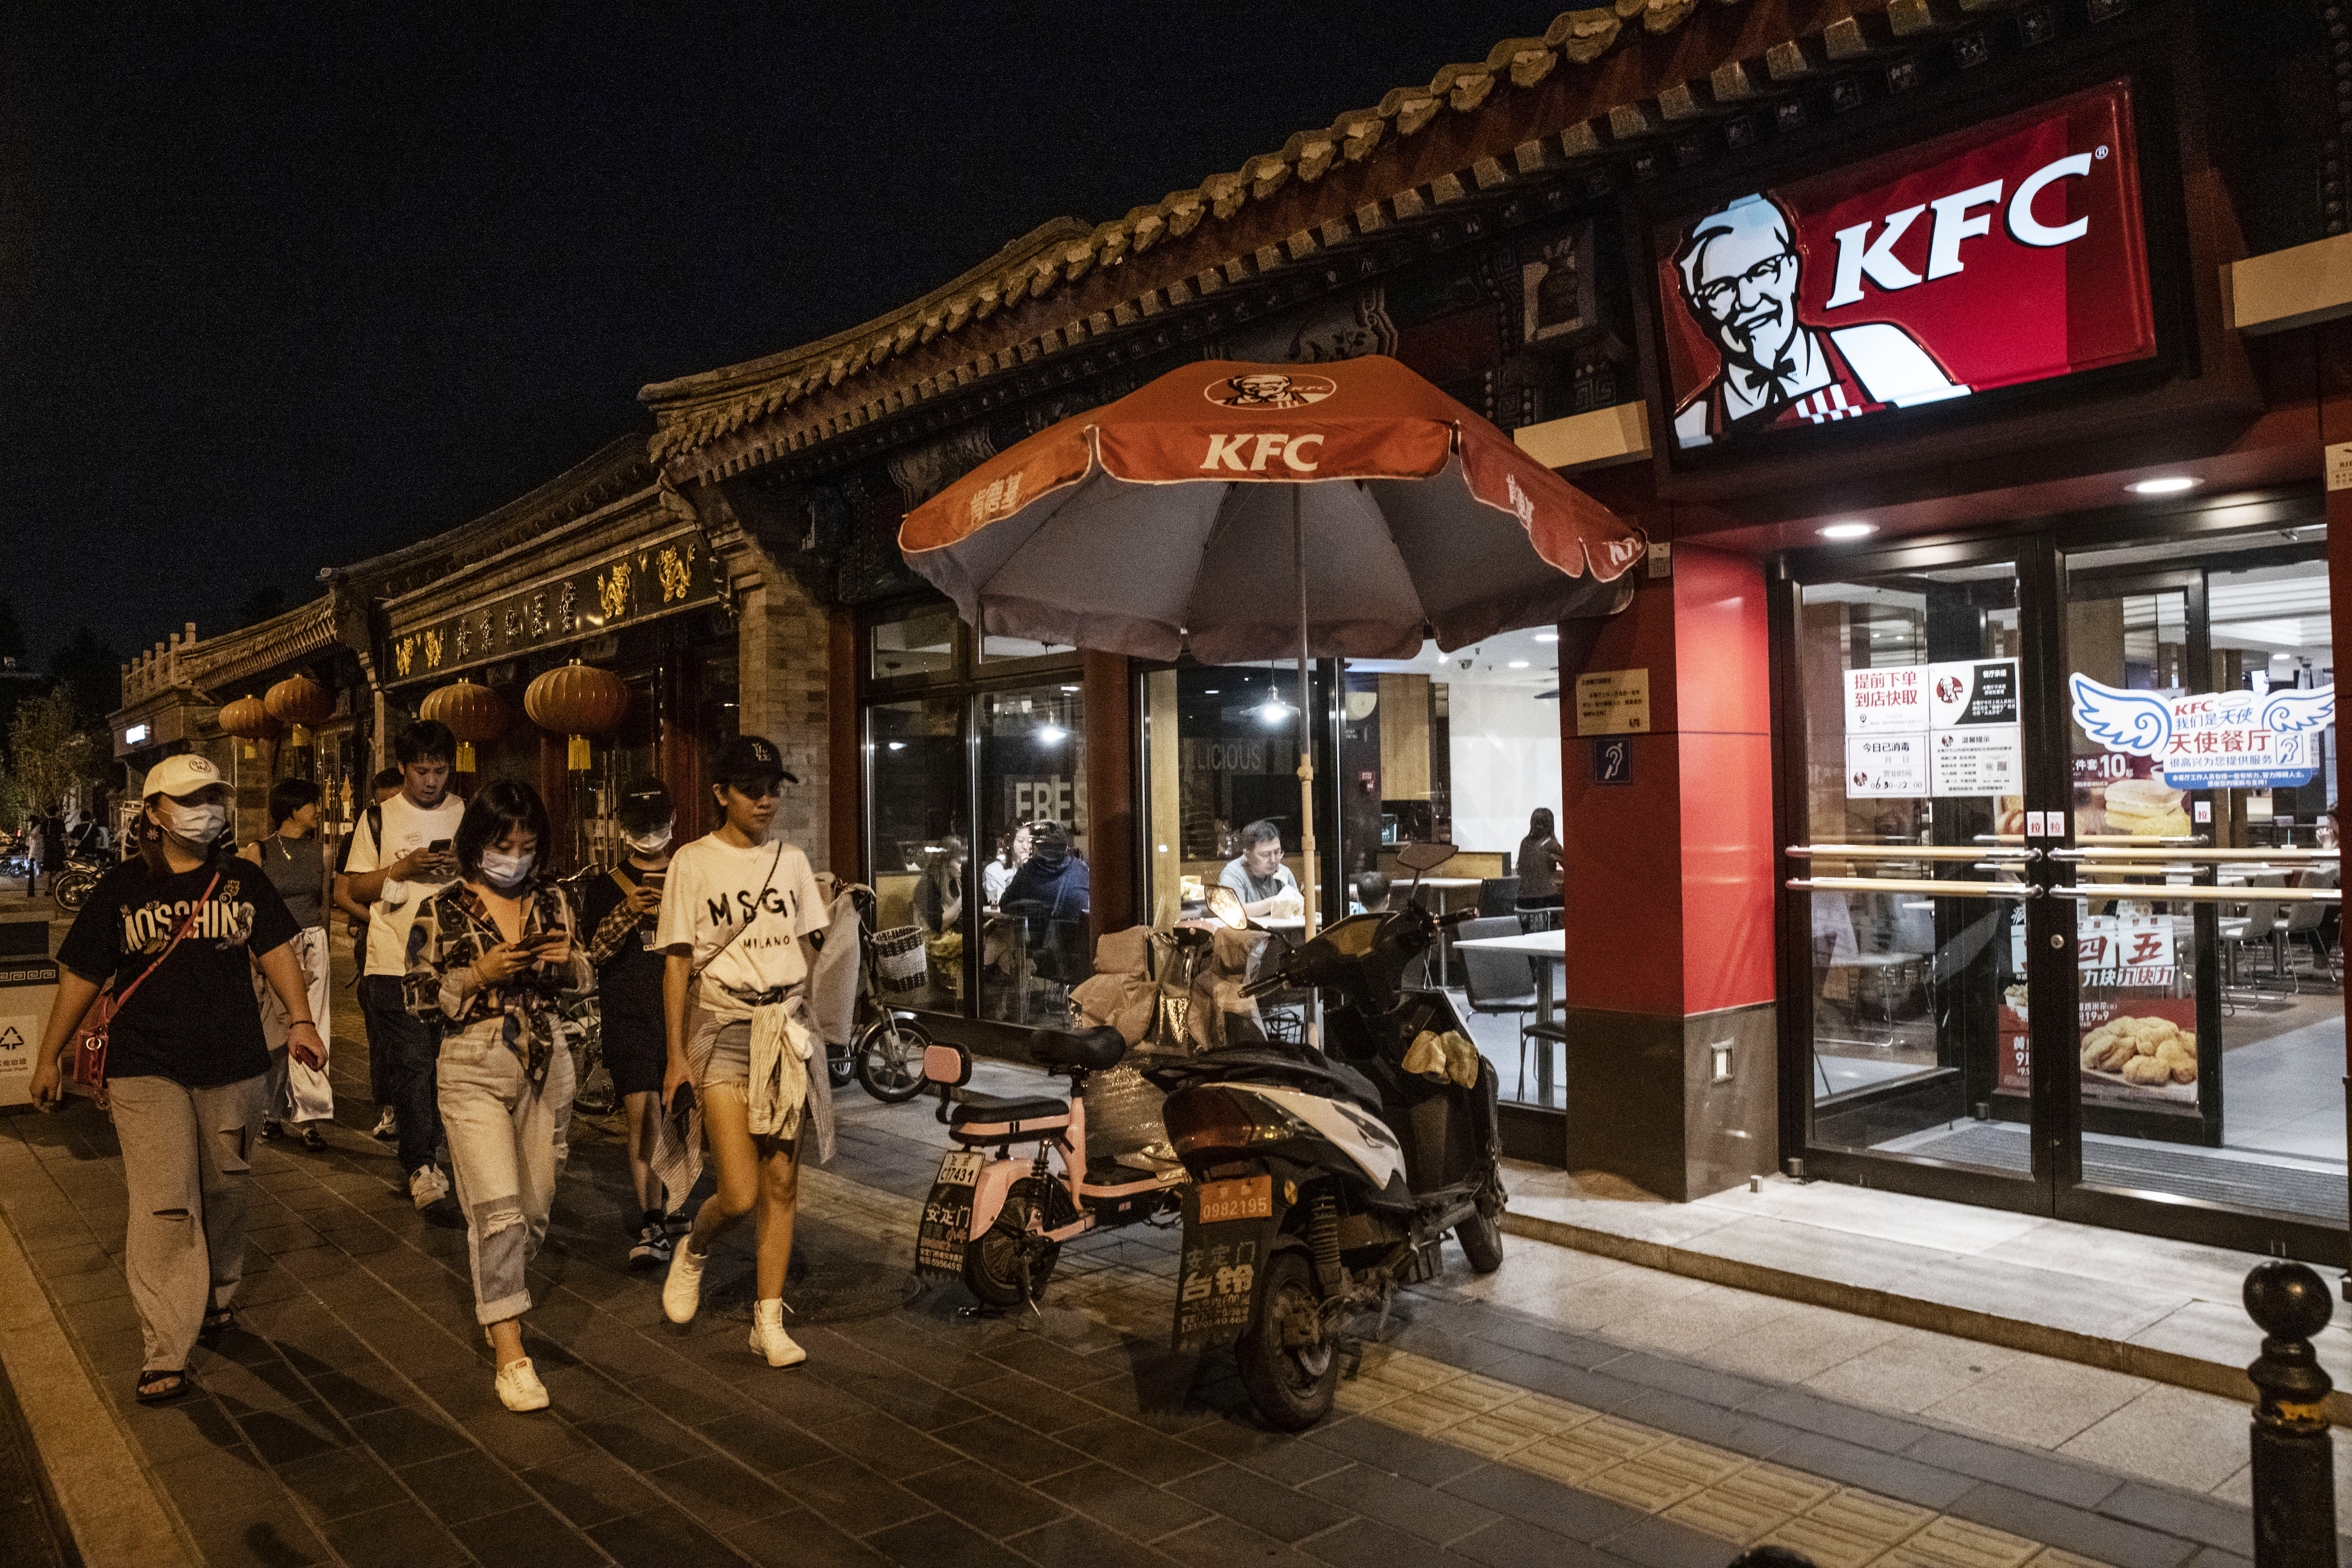 Pedestrians walk past a KFC restaurant operated by Yum China Holdings in Beijing on September 5, 2020. Photo: Bloomberg